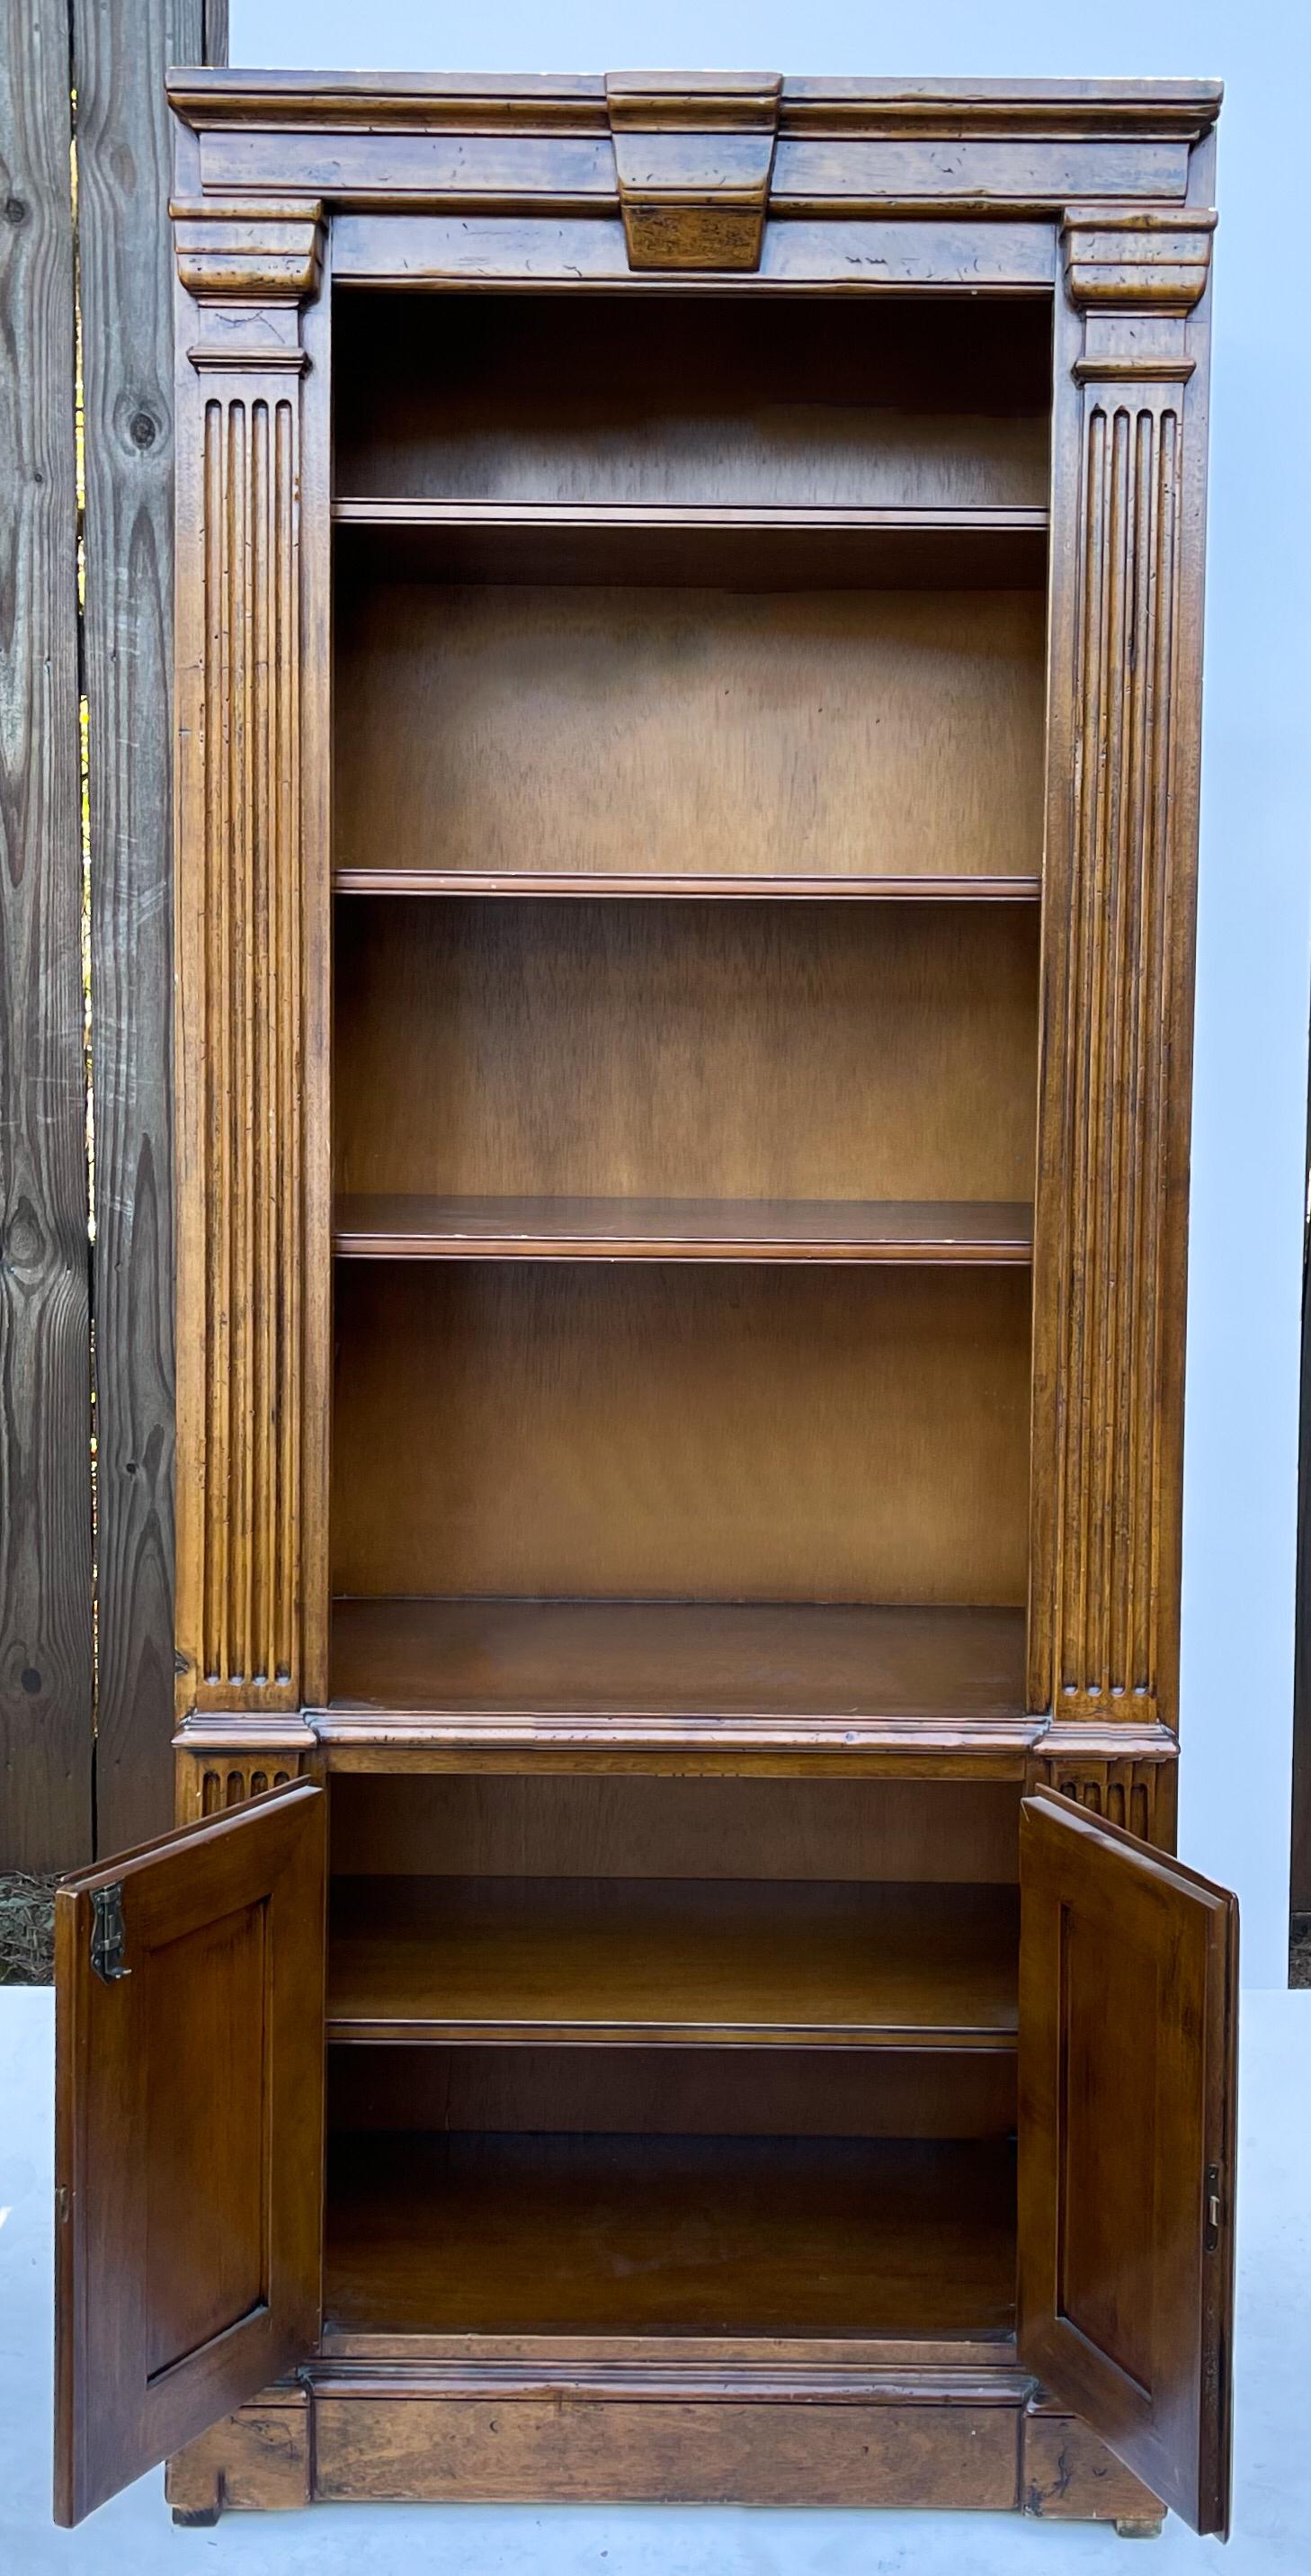 20th Century French Neo-Classical Italian Carved Walnut Bookcases for Bloomingdales, Pair